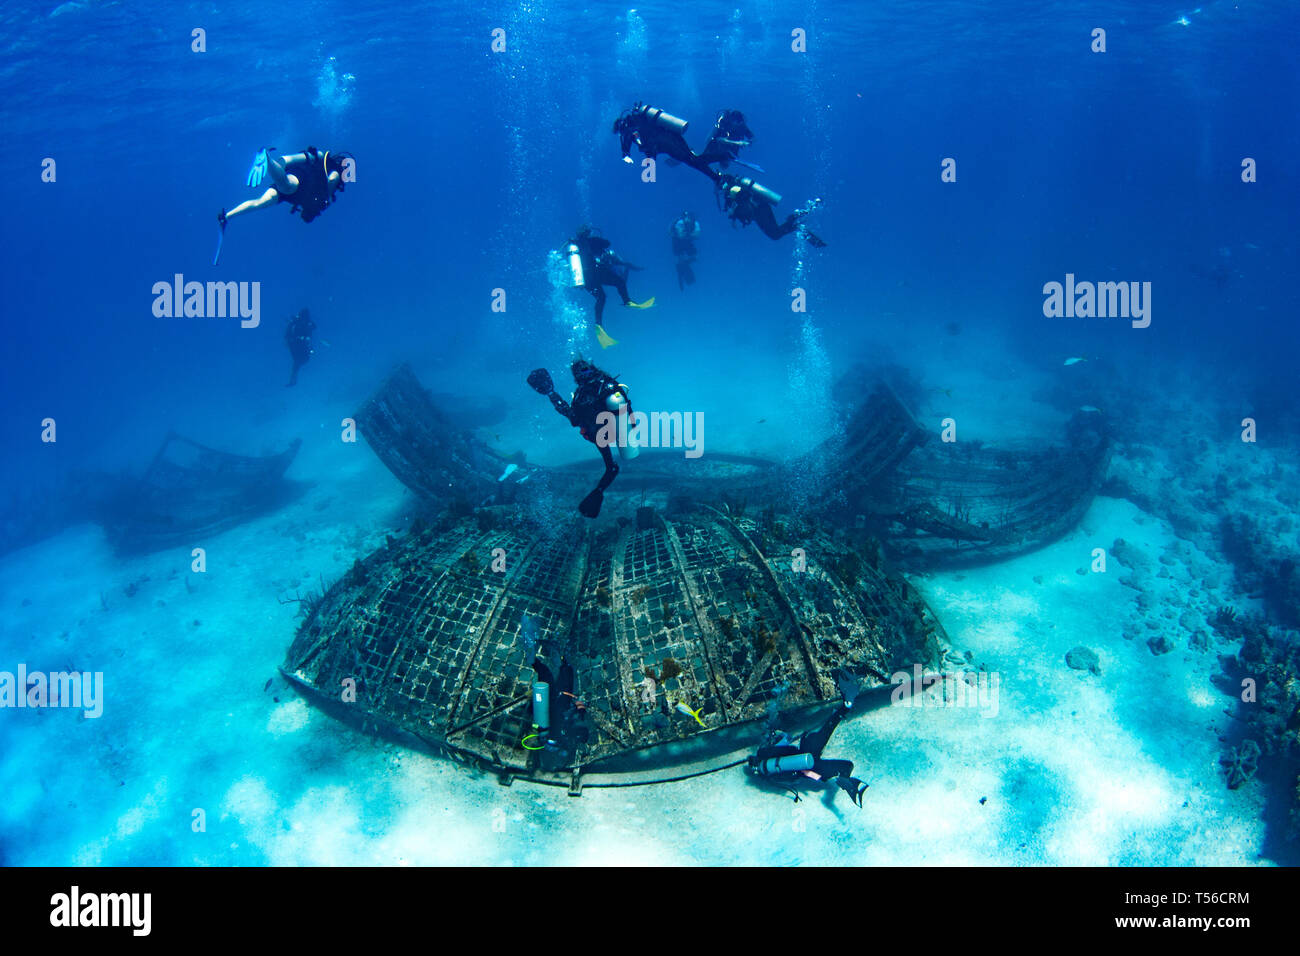 Divers explore what remains of the Thunder-dome, now an artificial reef in Turks & Caicos Islands. Stock Photo